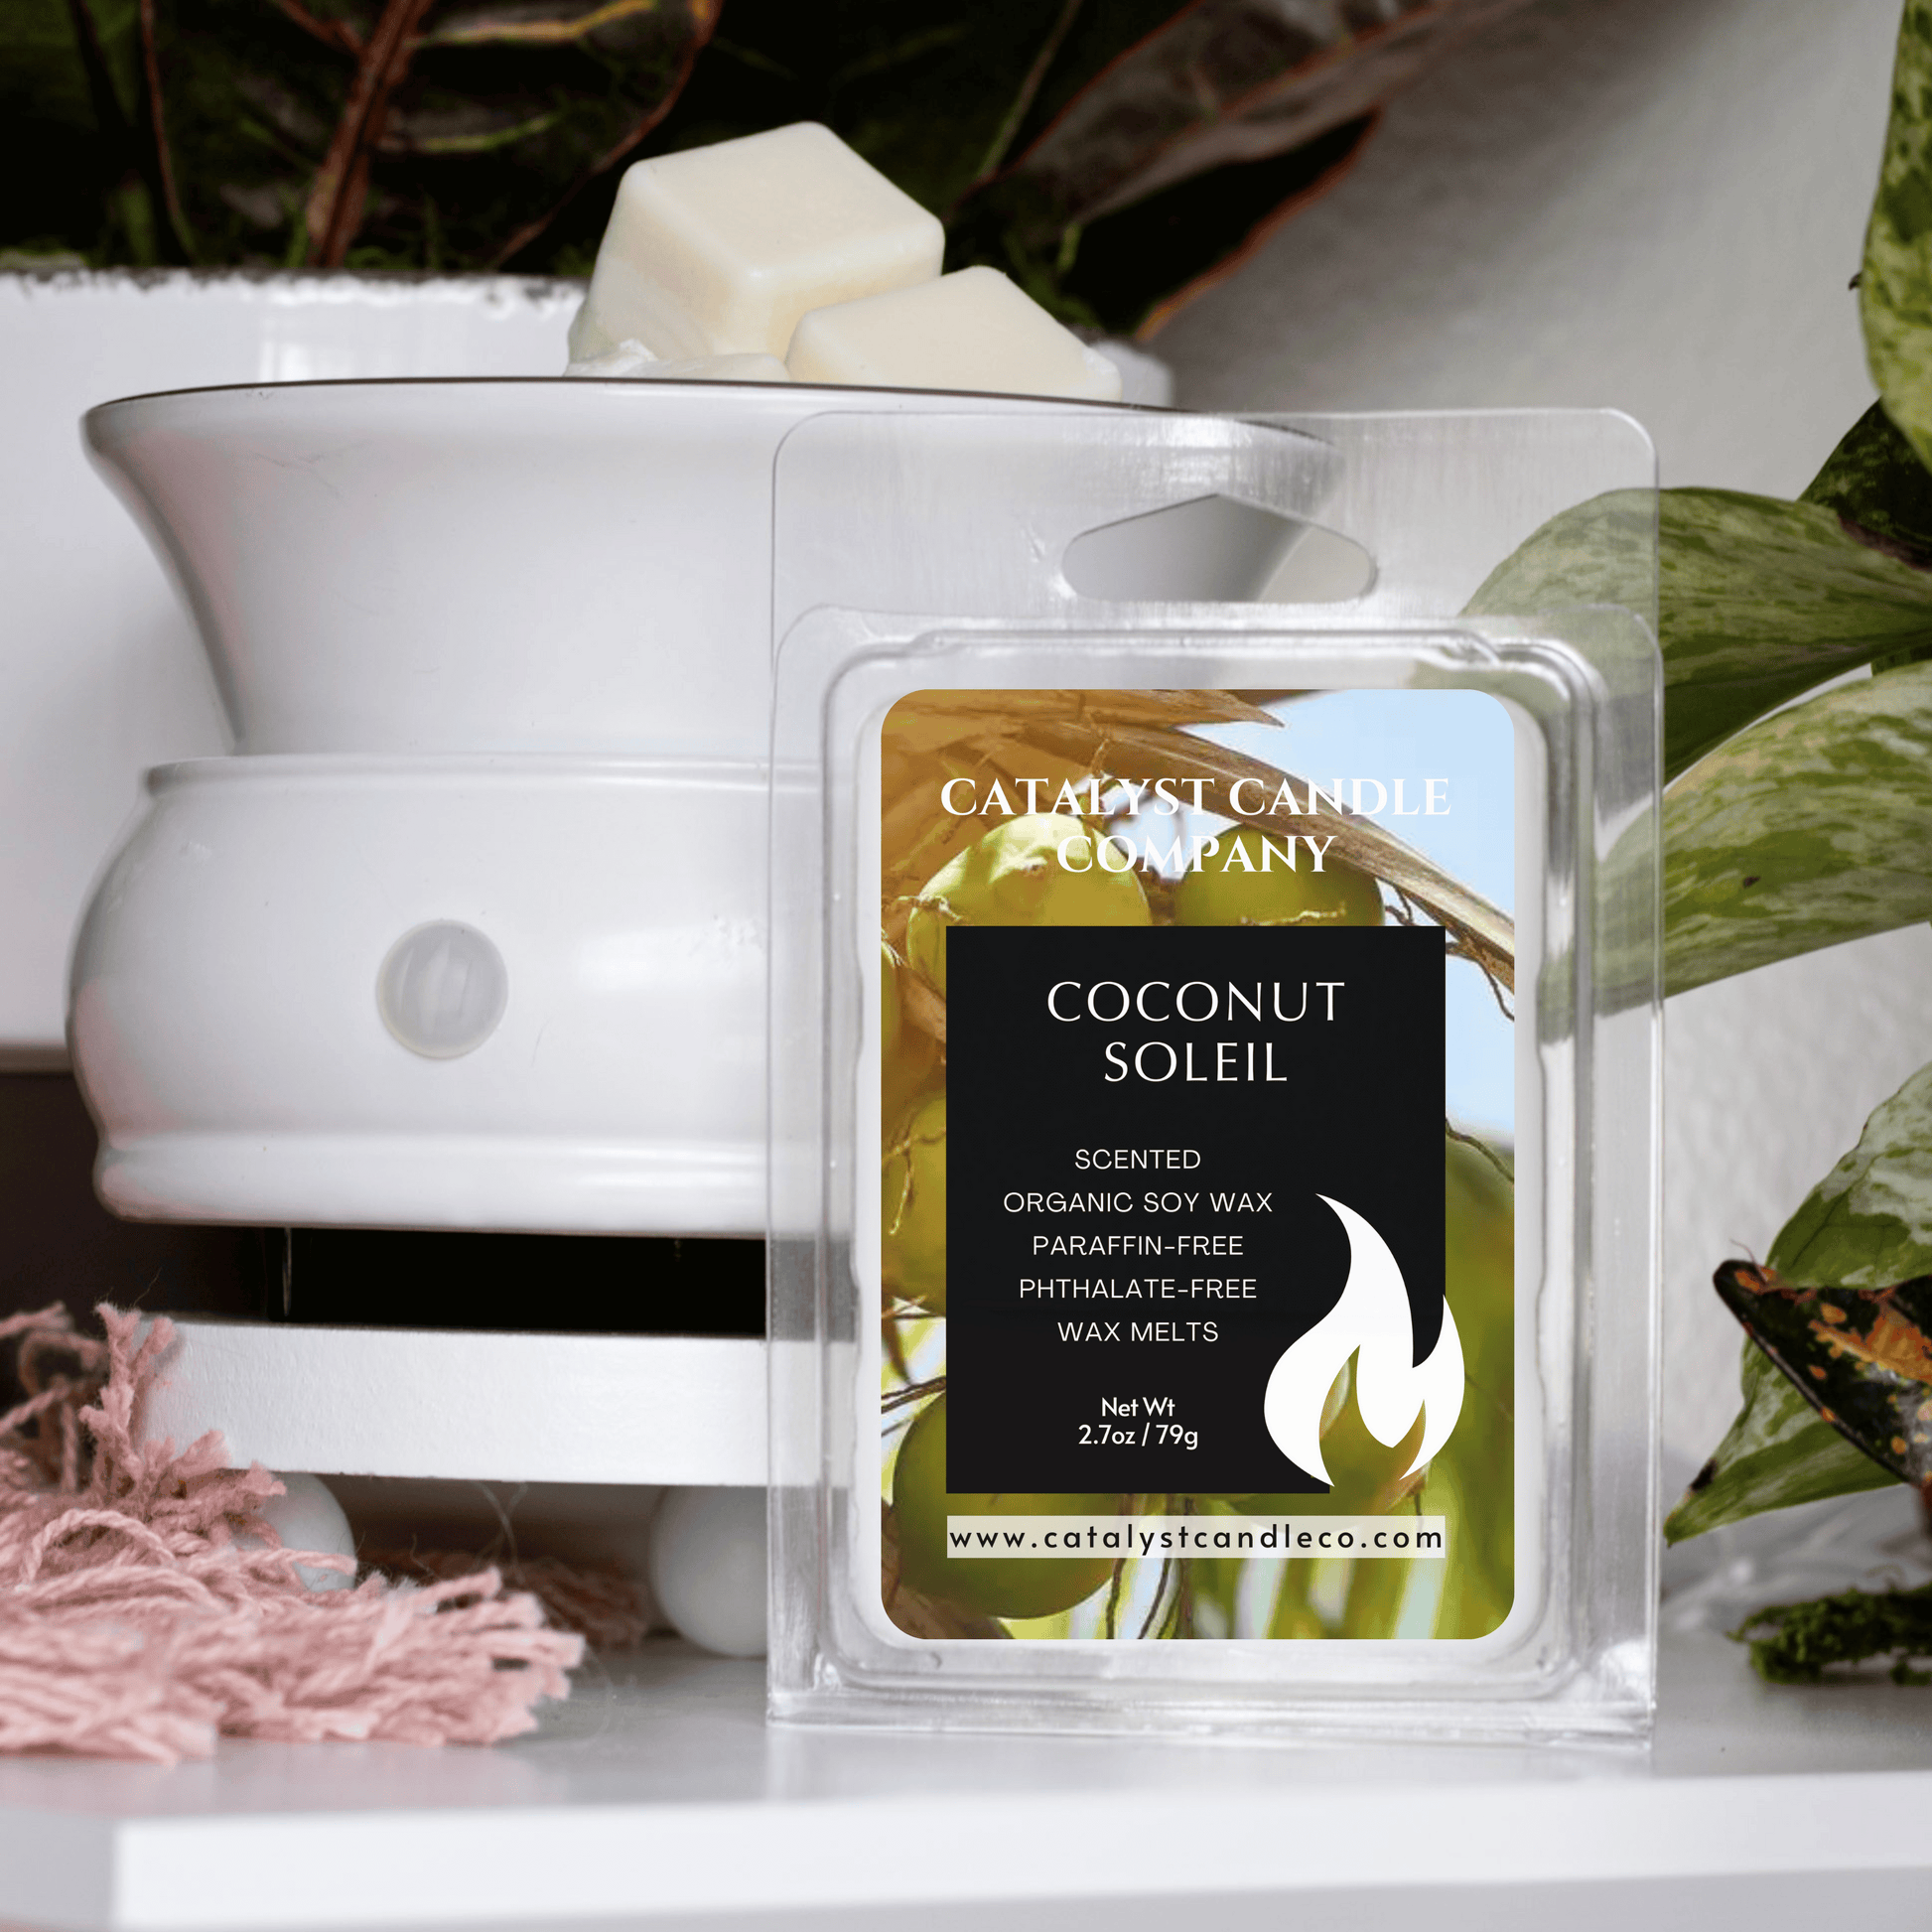 Coconut Soleil scented soy wax melts. Catalyst Candle Company, LLC